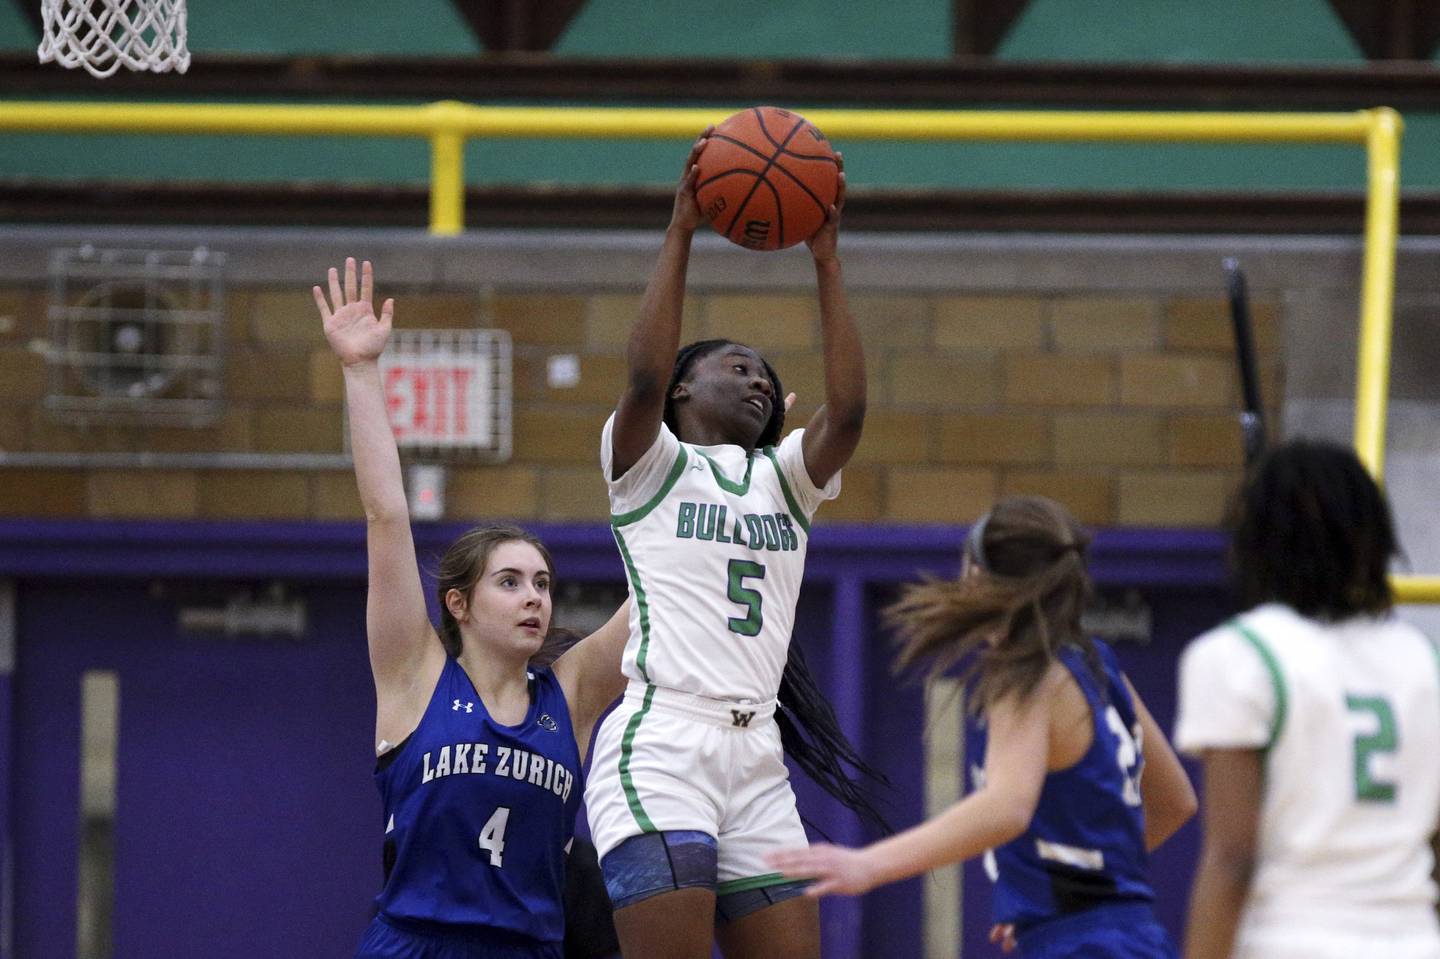 Waukegan’s Andreya’nna Hicks (5) grabs a rebound in front of Lake Zurich’s Molly Friesen (4) during a game in Waukegan on Thursday, Dec. 1, 2022. 